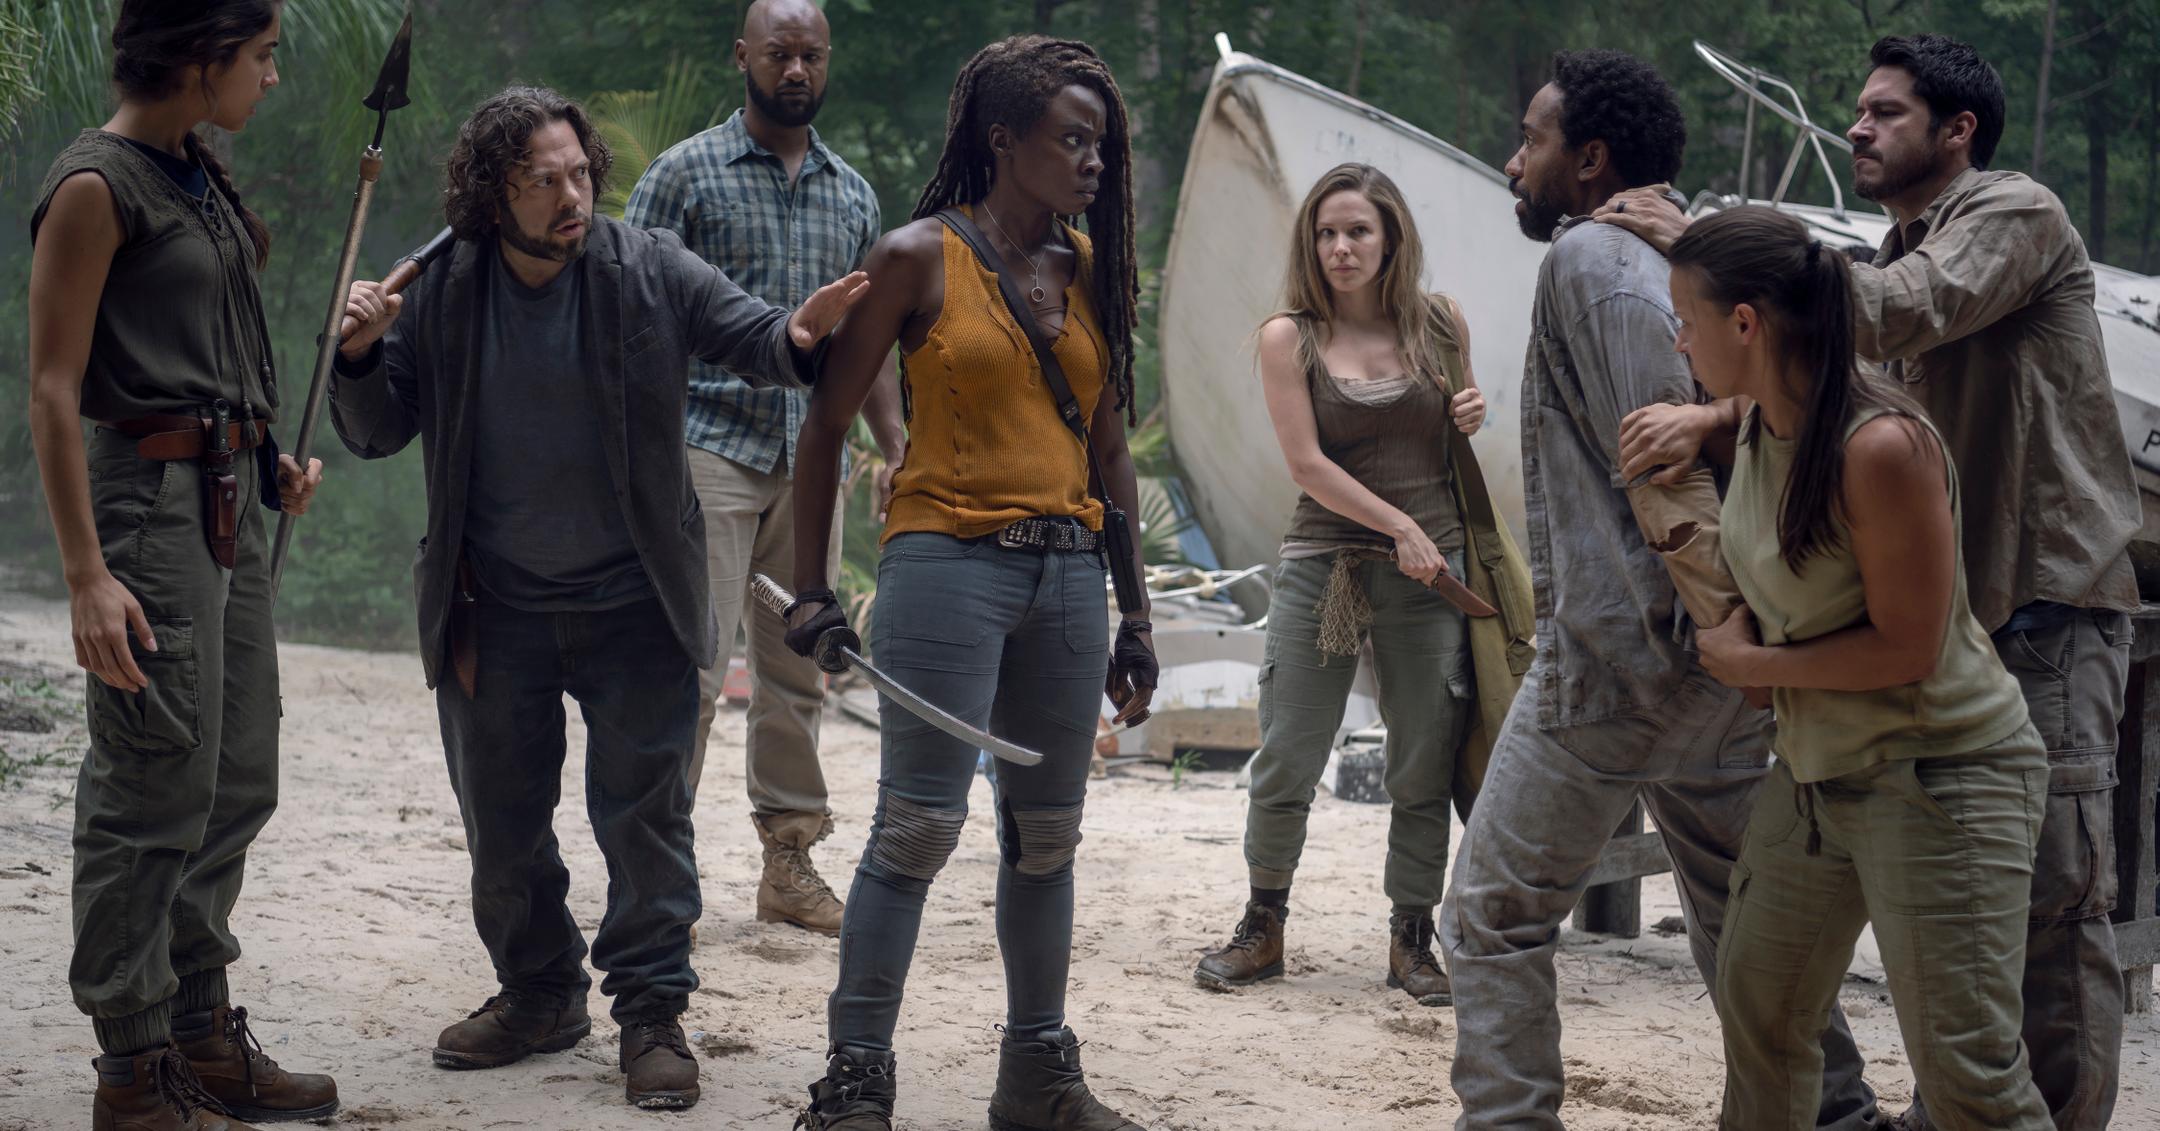 When Does 'The Walking Dead' Return In 2020? Fans Are Dying to Know